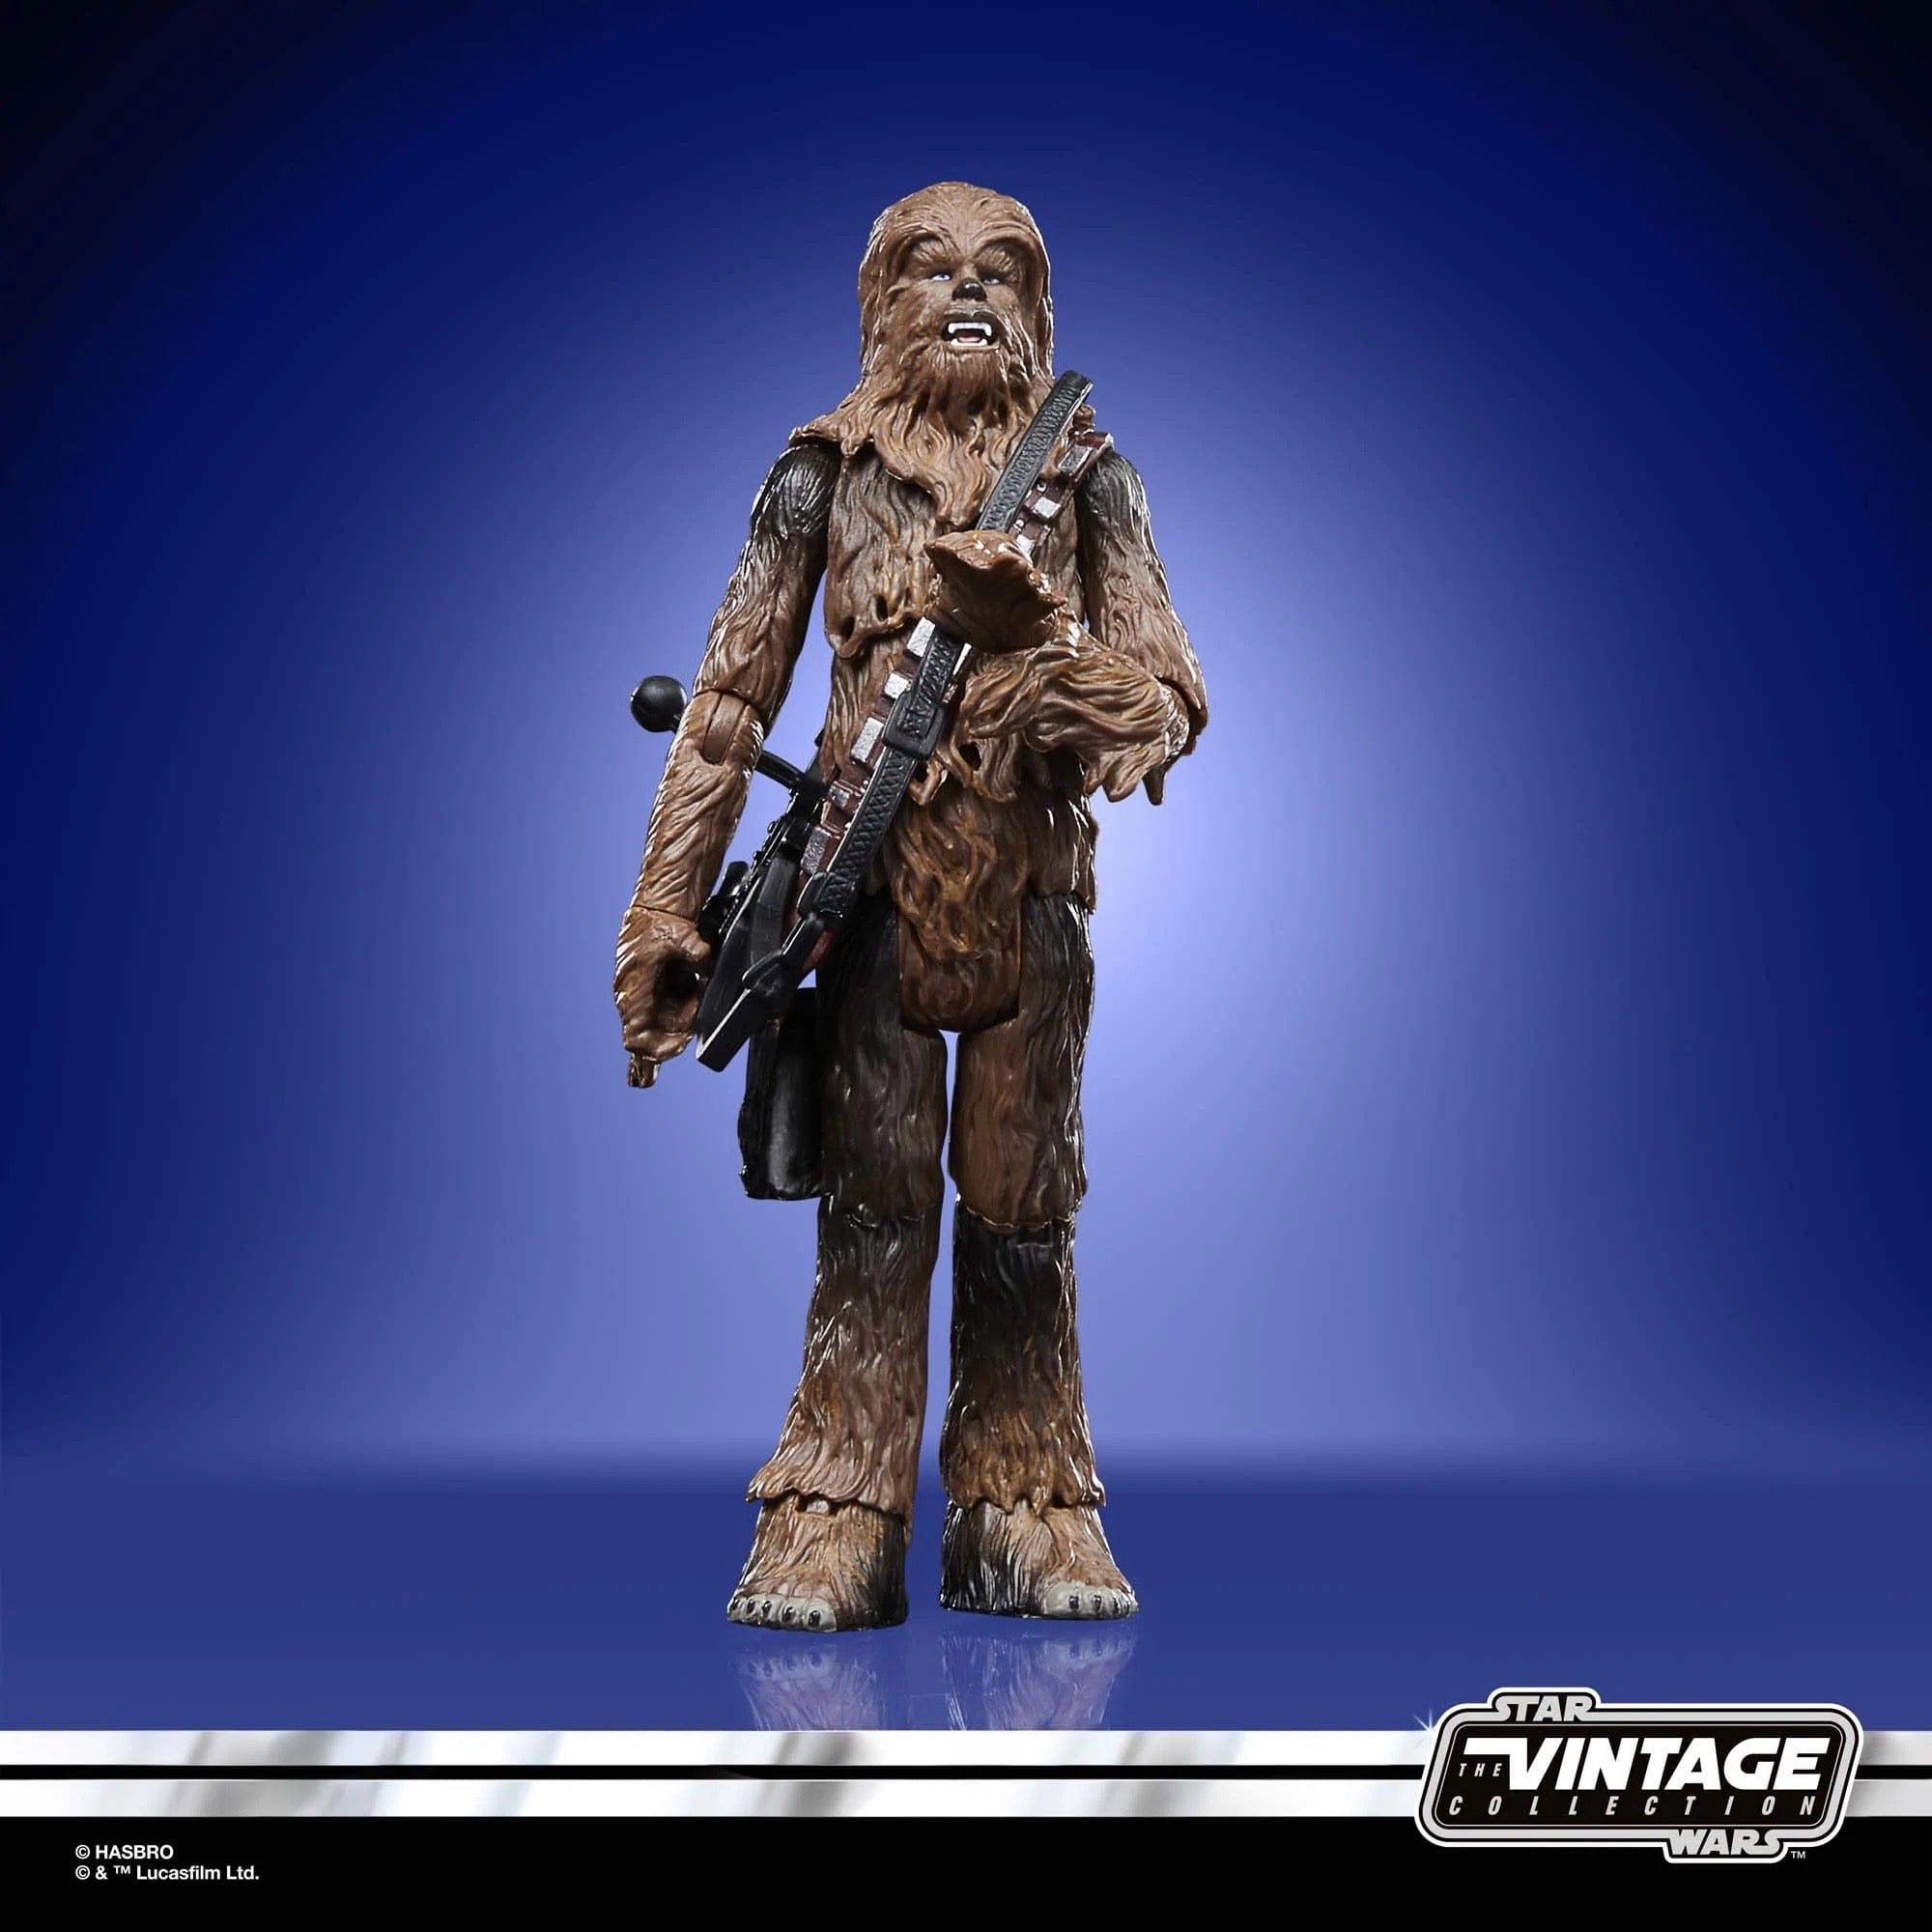 Hasbro Star Wars The Vintage Collection Return of the Jedi AT-ST and Chewbacca Action Figure Set